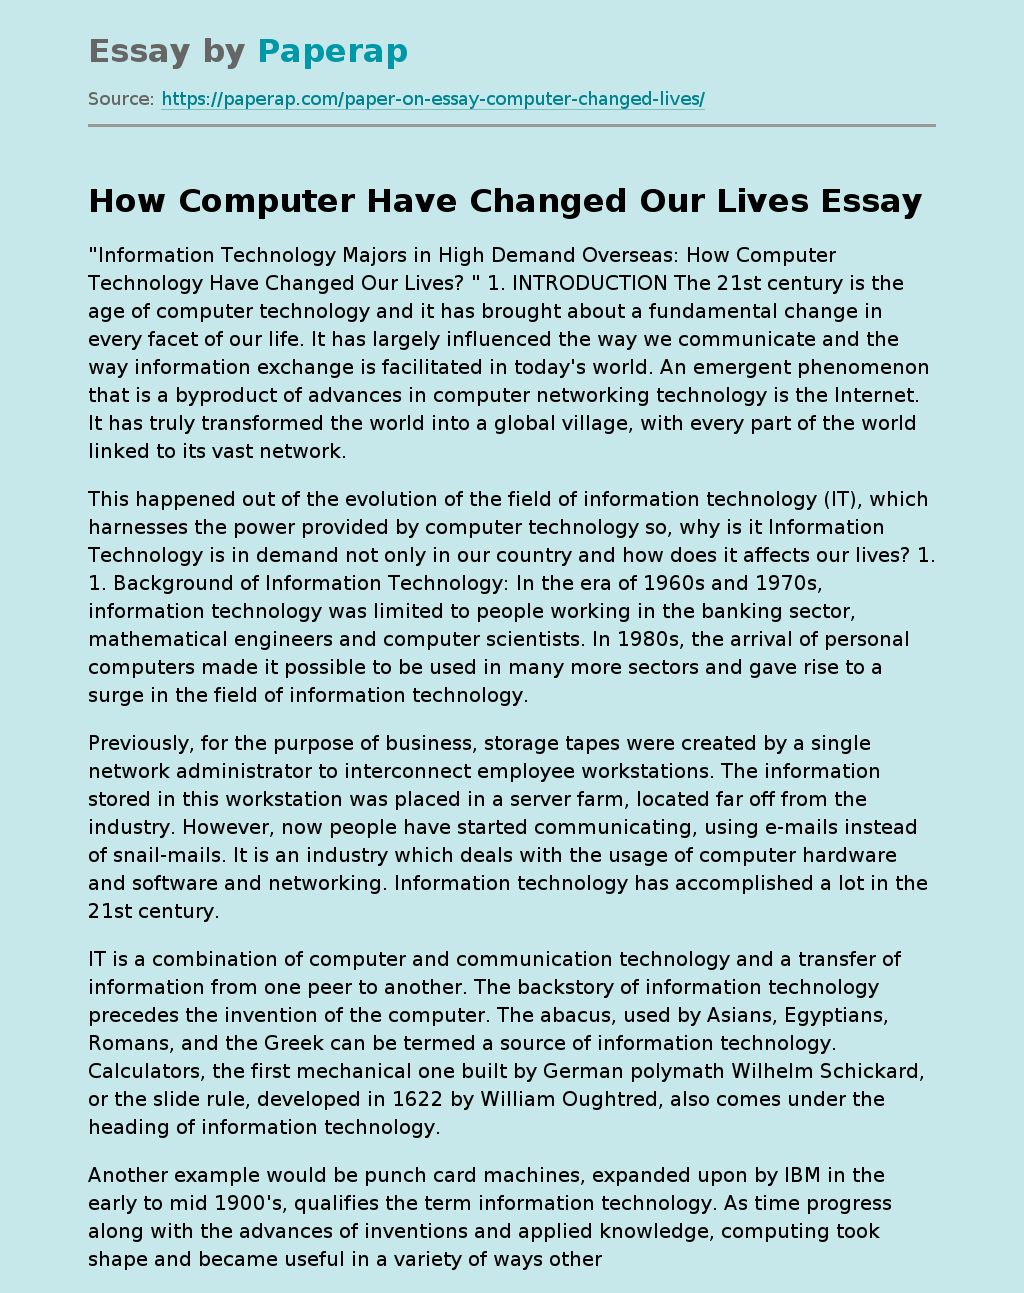 How Computer Have Changed Our Lives